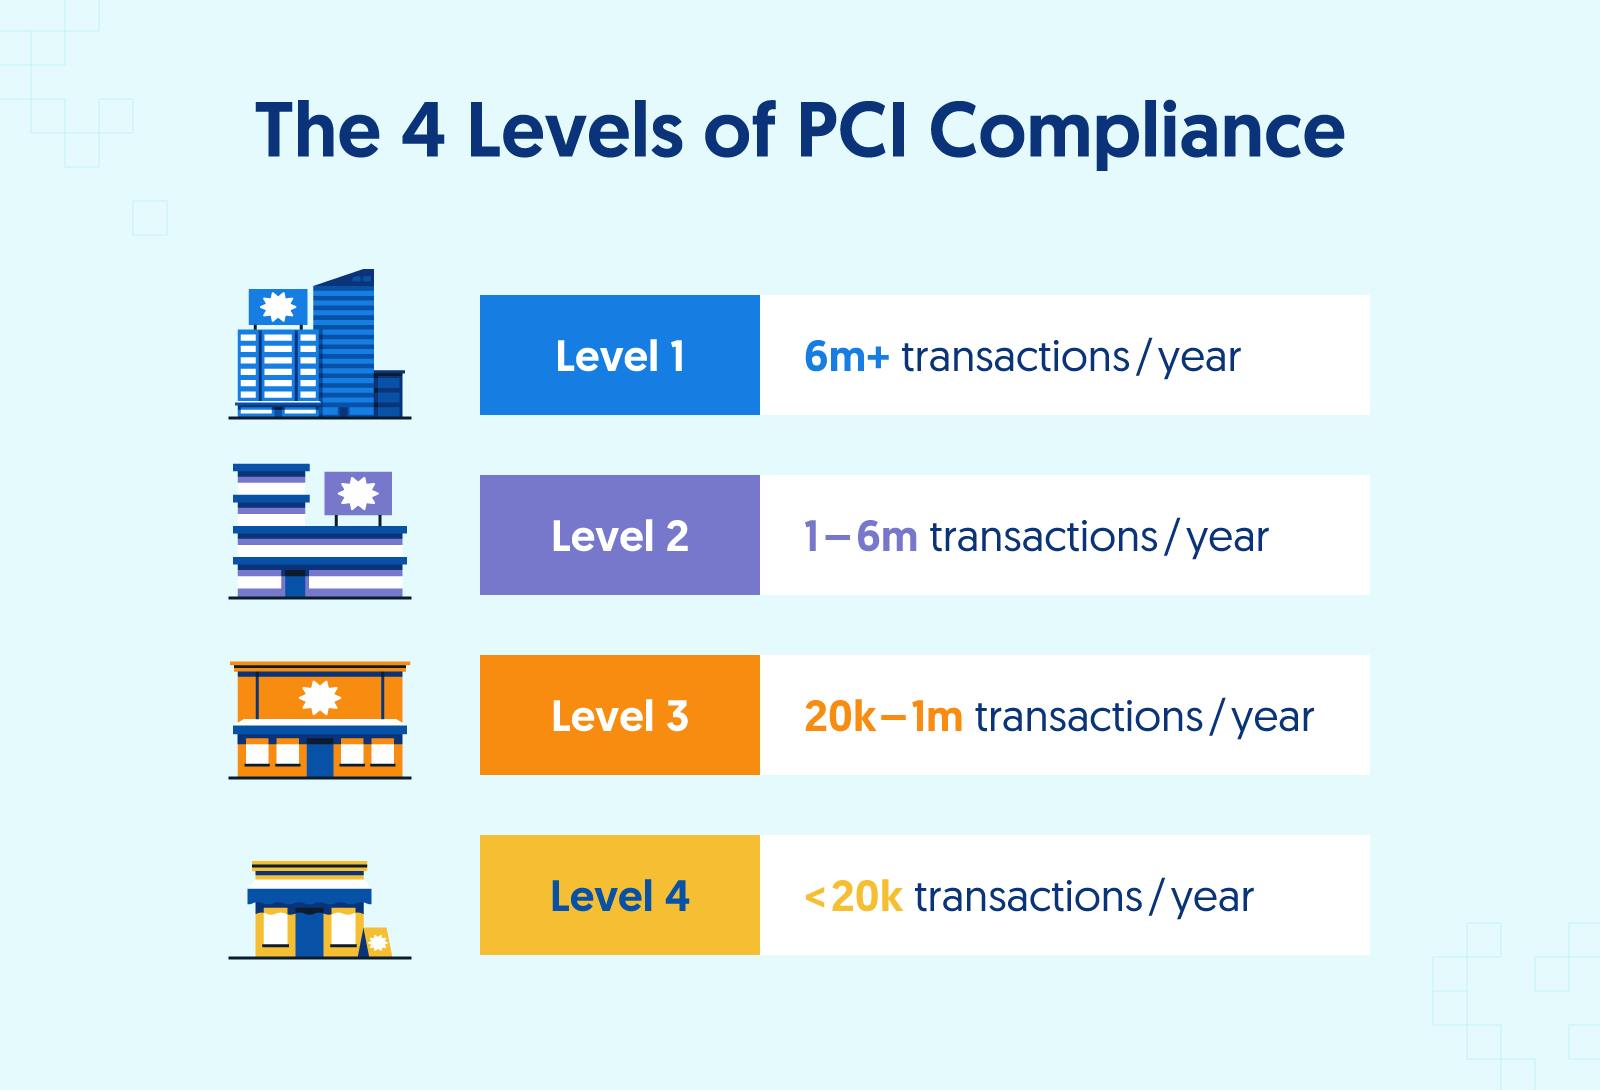 What are the 4 levels of PCI compliance?